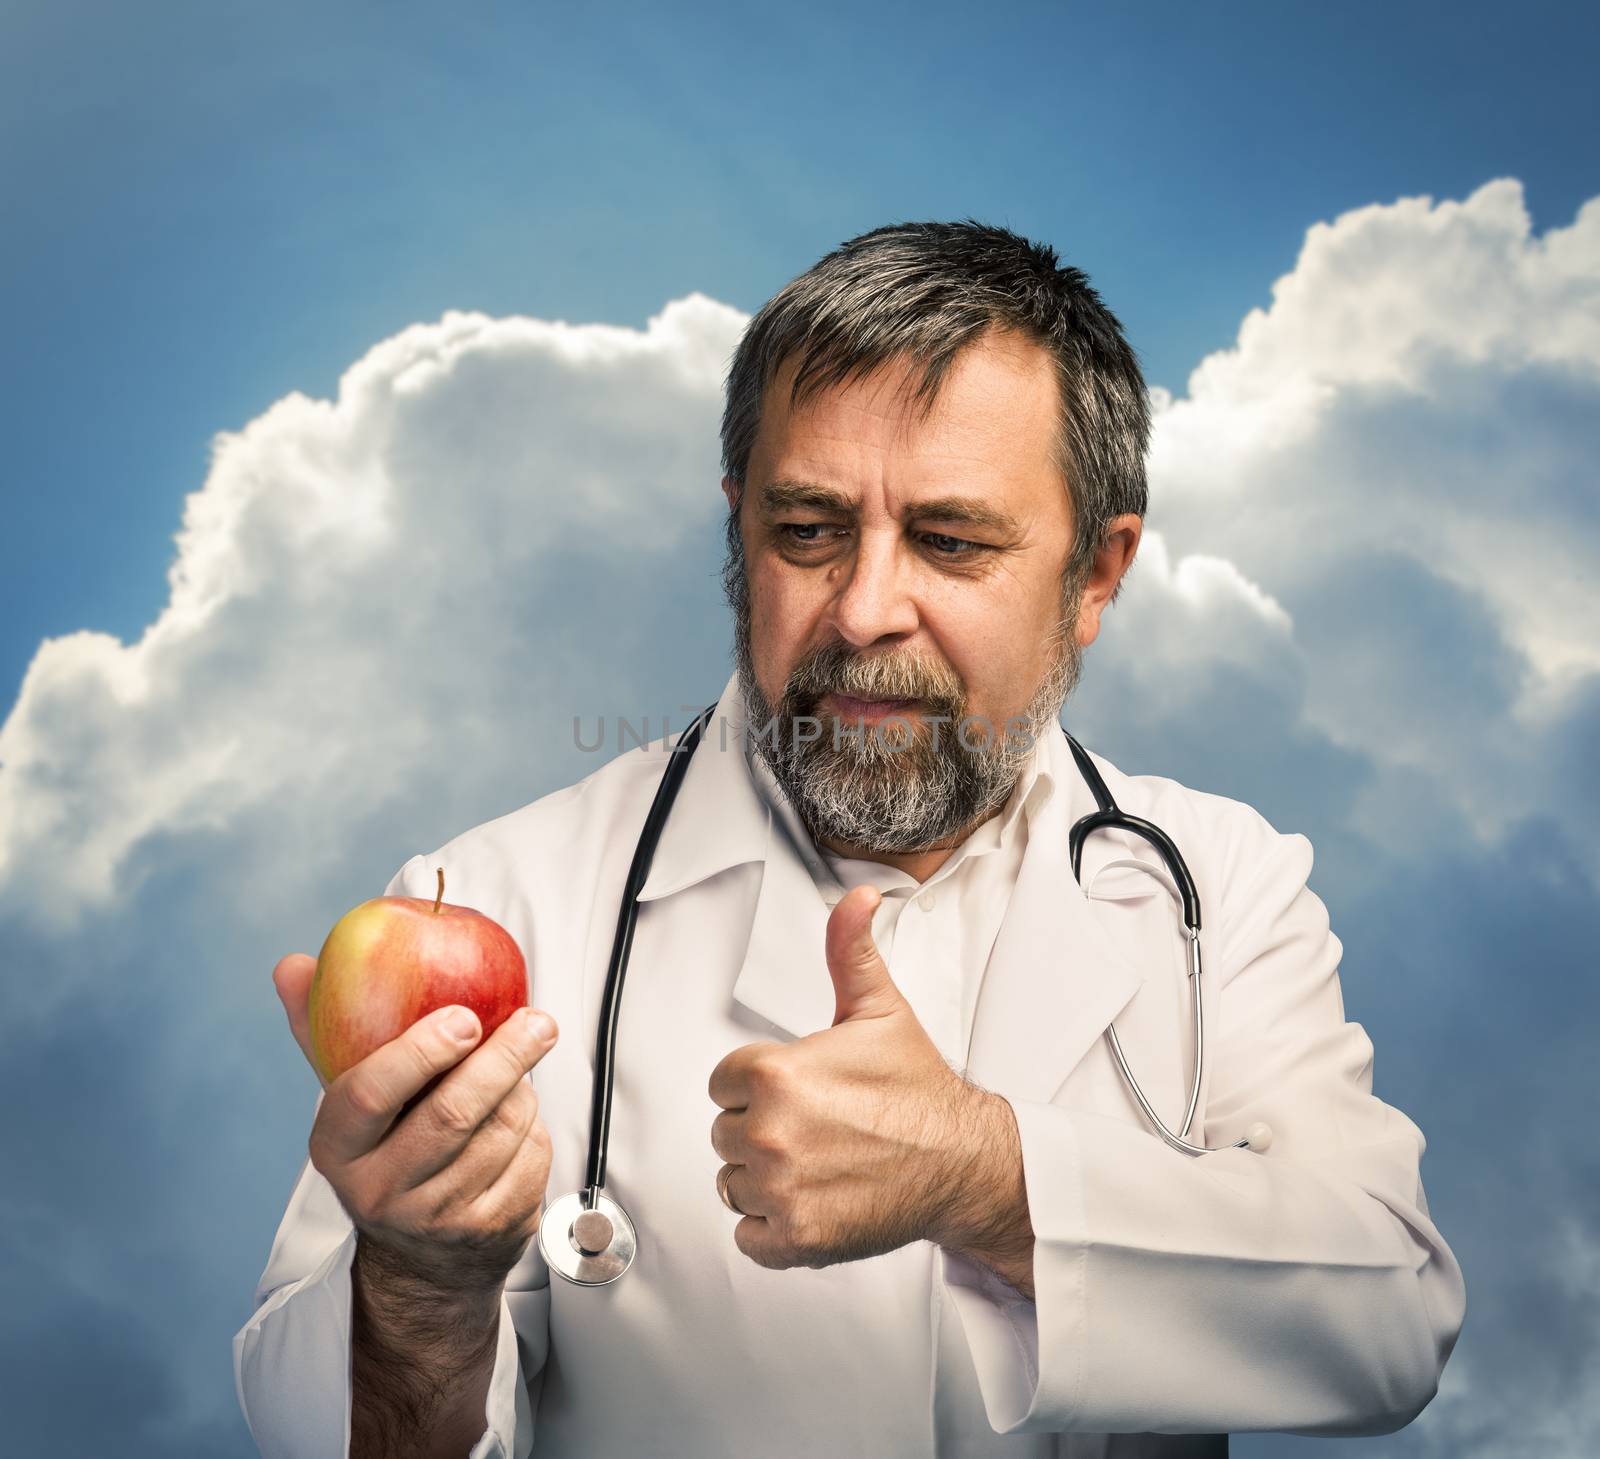 Healthy lifestyles concept. Doctor giving apple for healthy eating and lifestyle or good diet against the cloudy sky. Focus on face